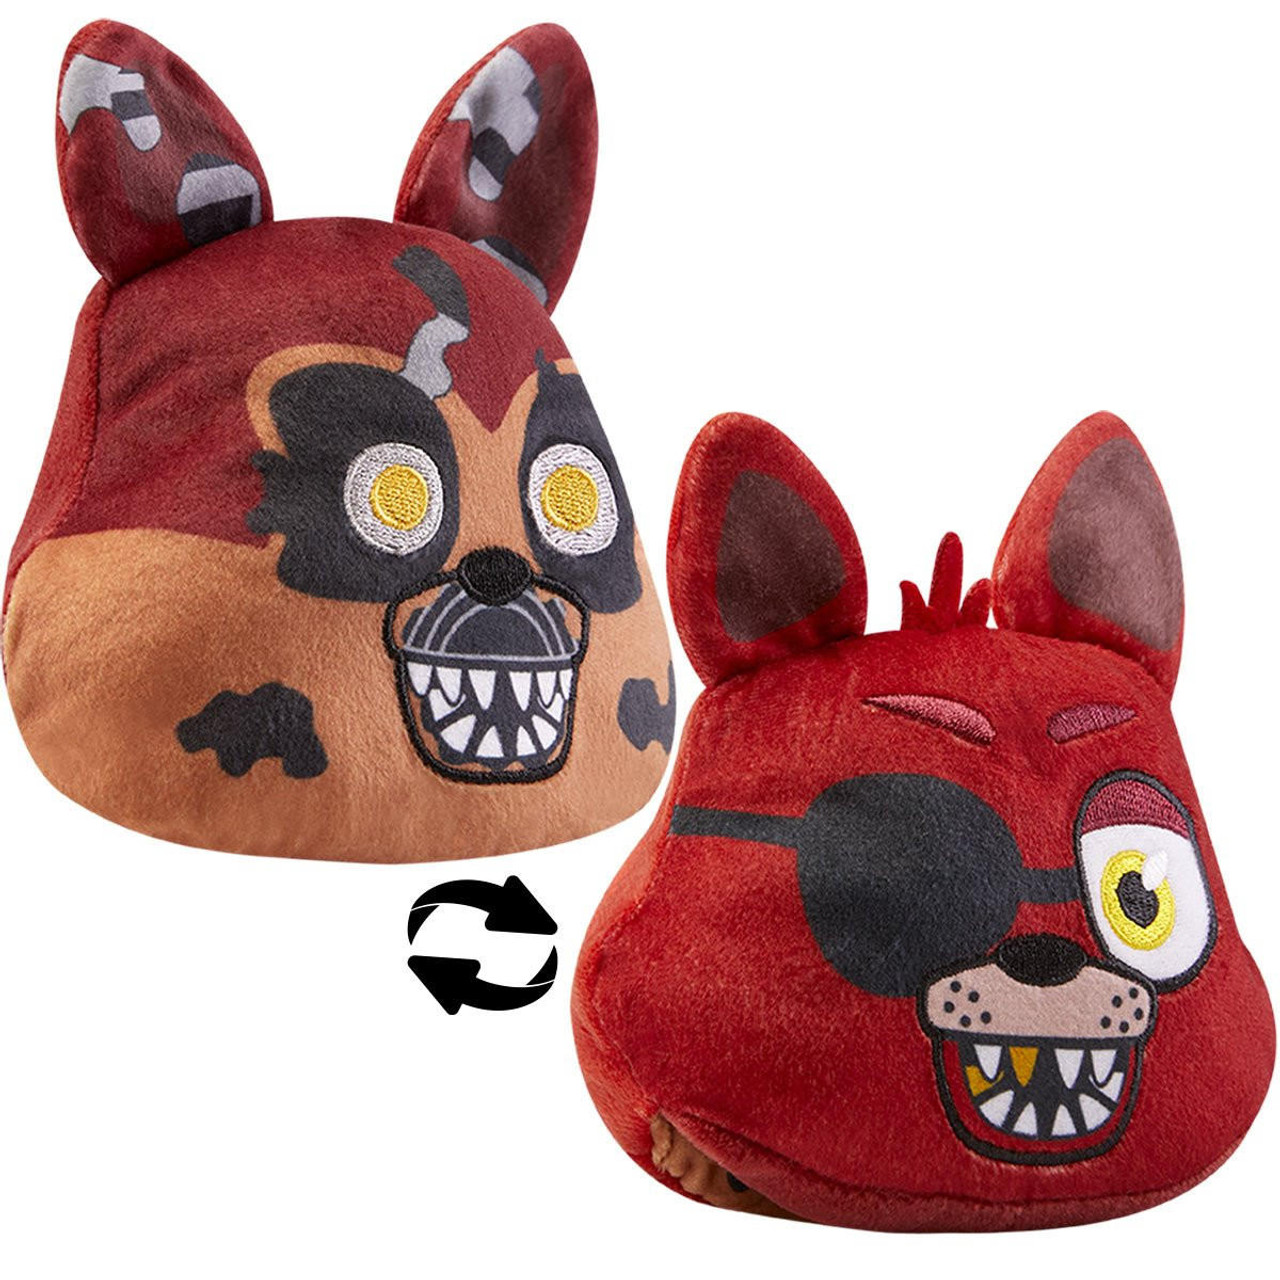 Five Nights At Freddy's Plush Foxy With Missing Nose